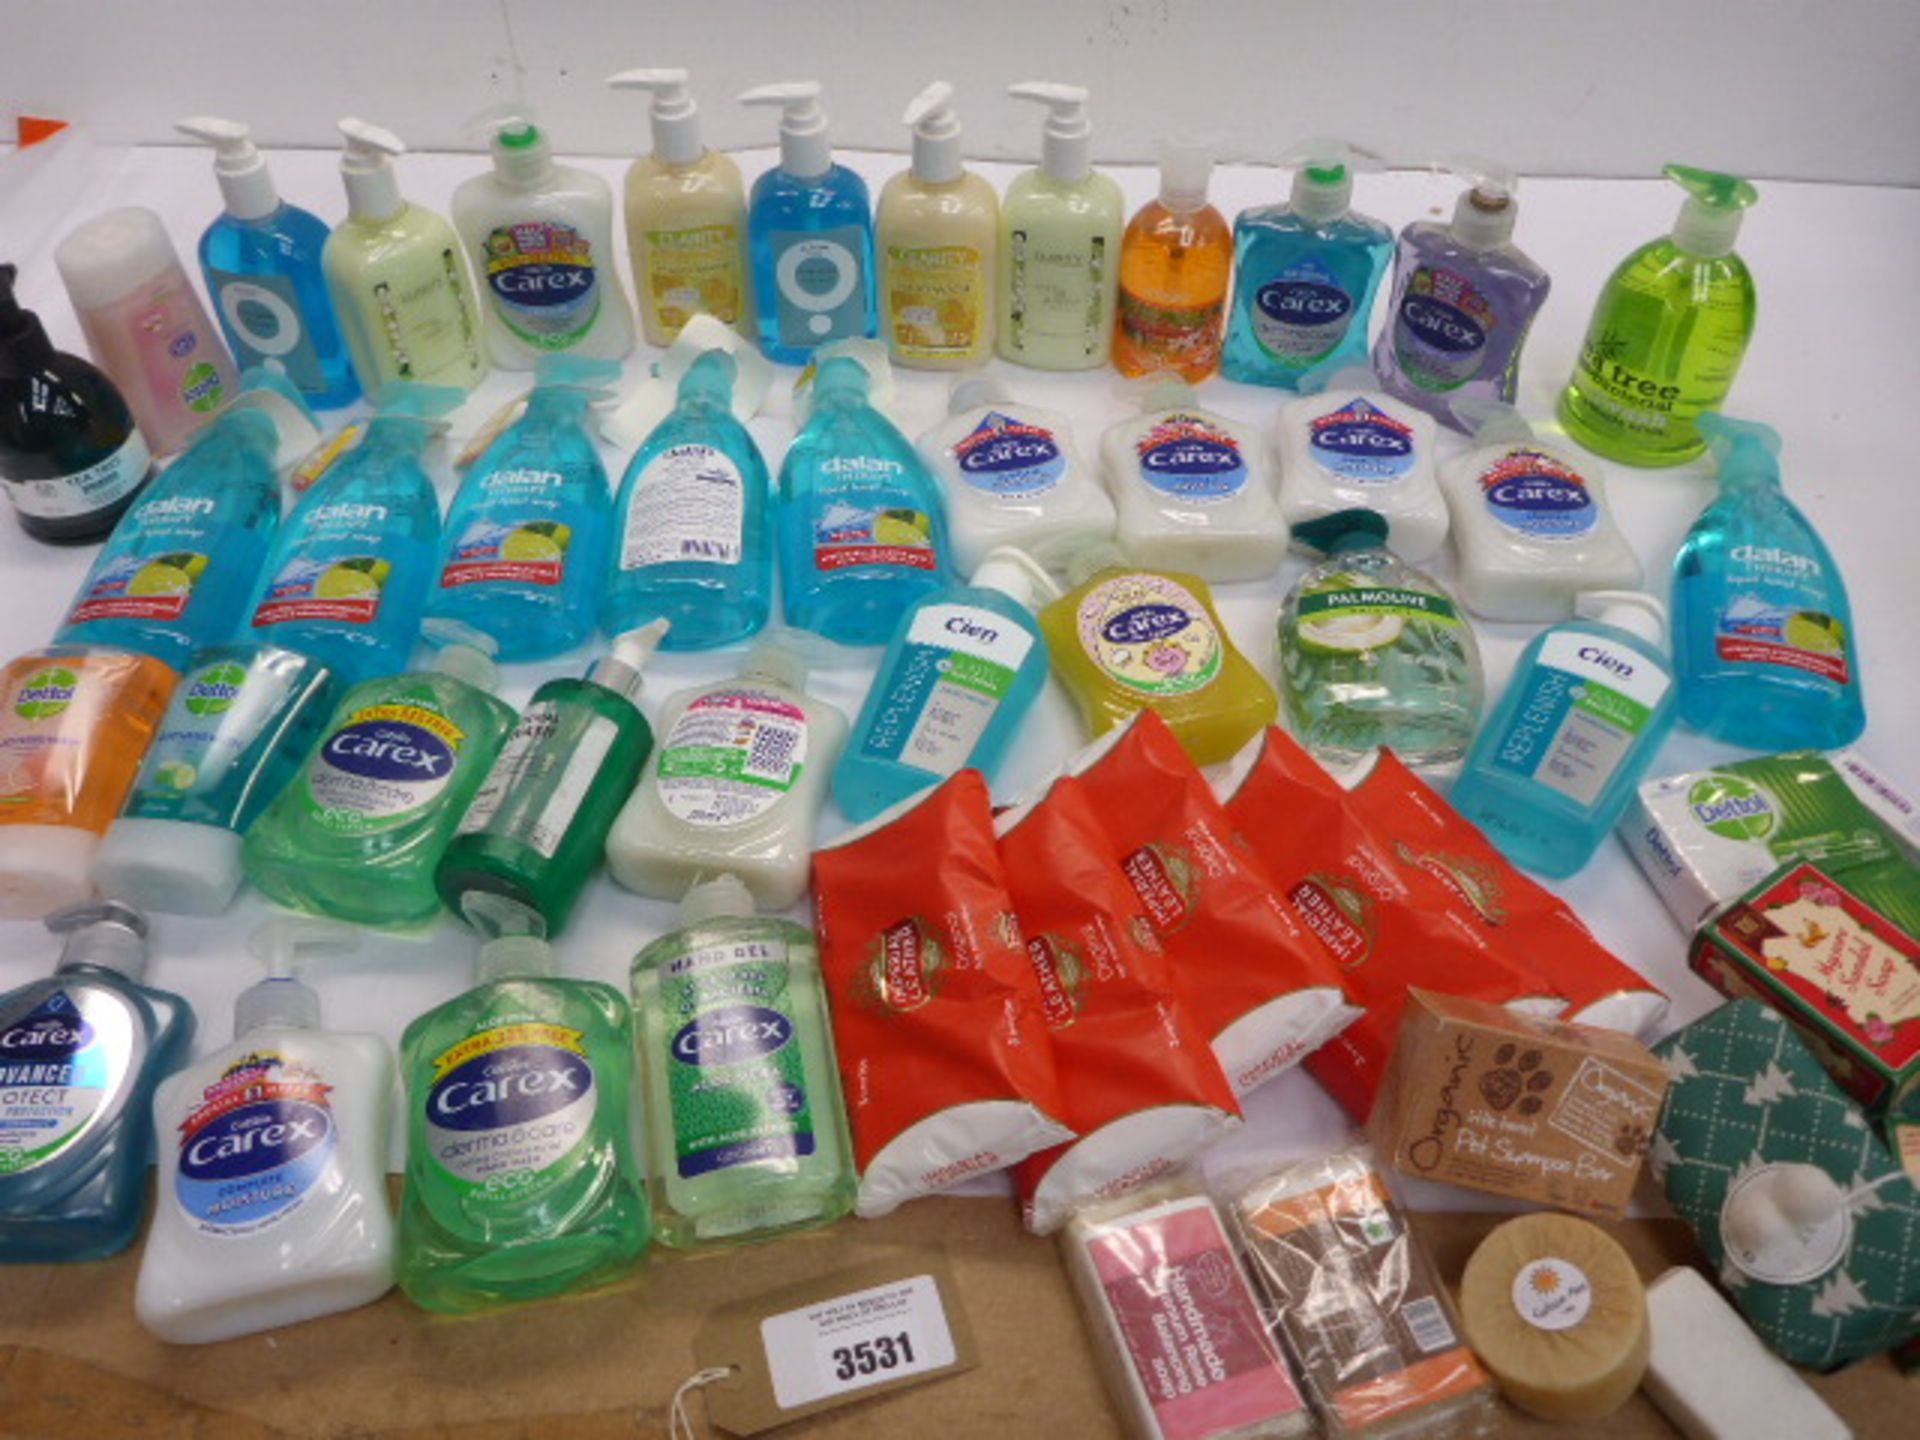 Bag containing Carex and other liquid hand soaps and bars of soap